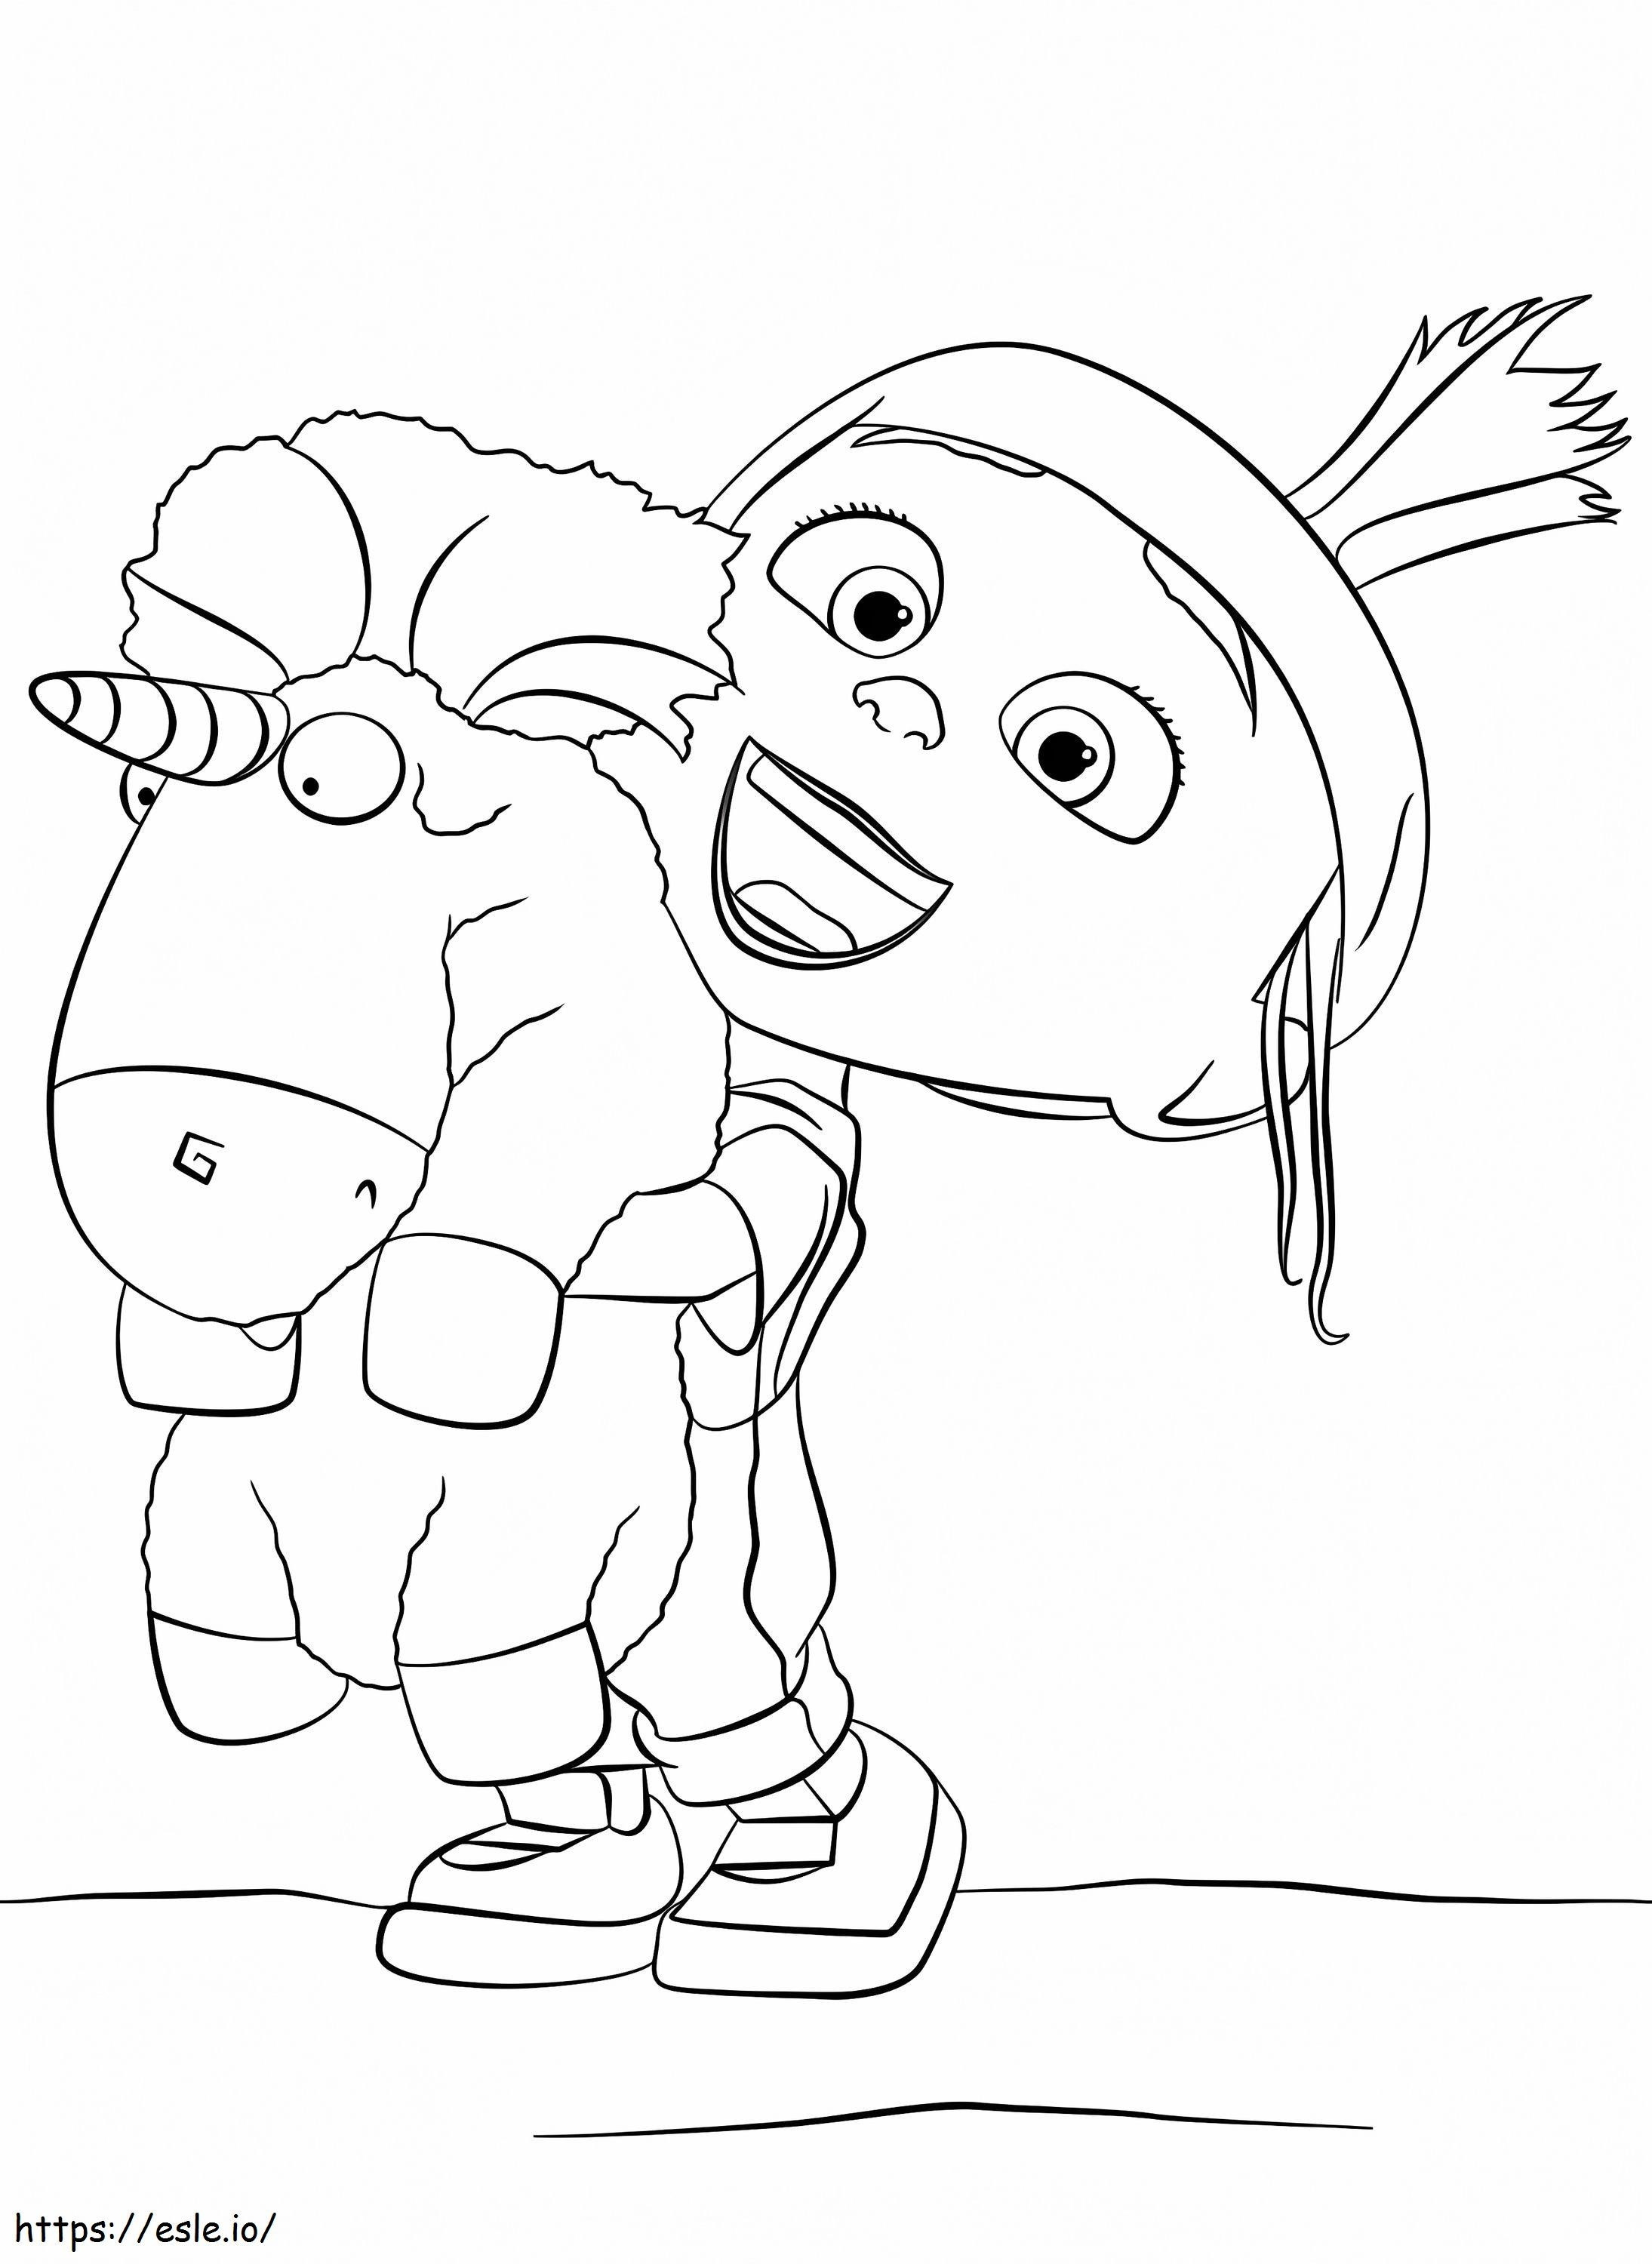 Agnes With Unicorn coloring page